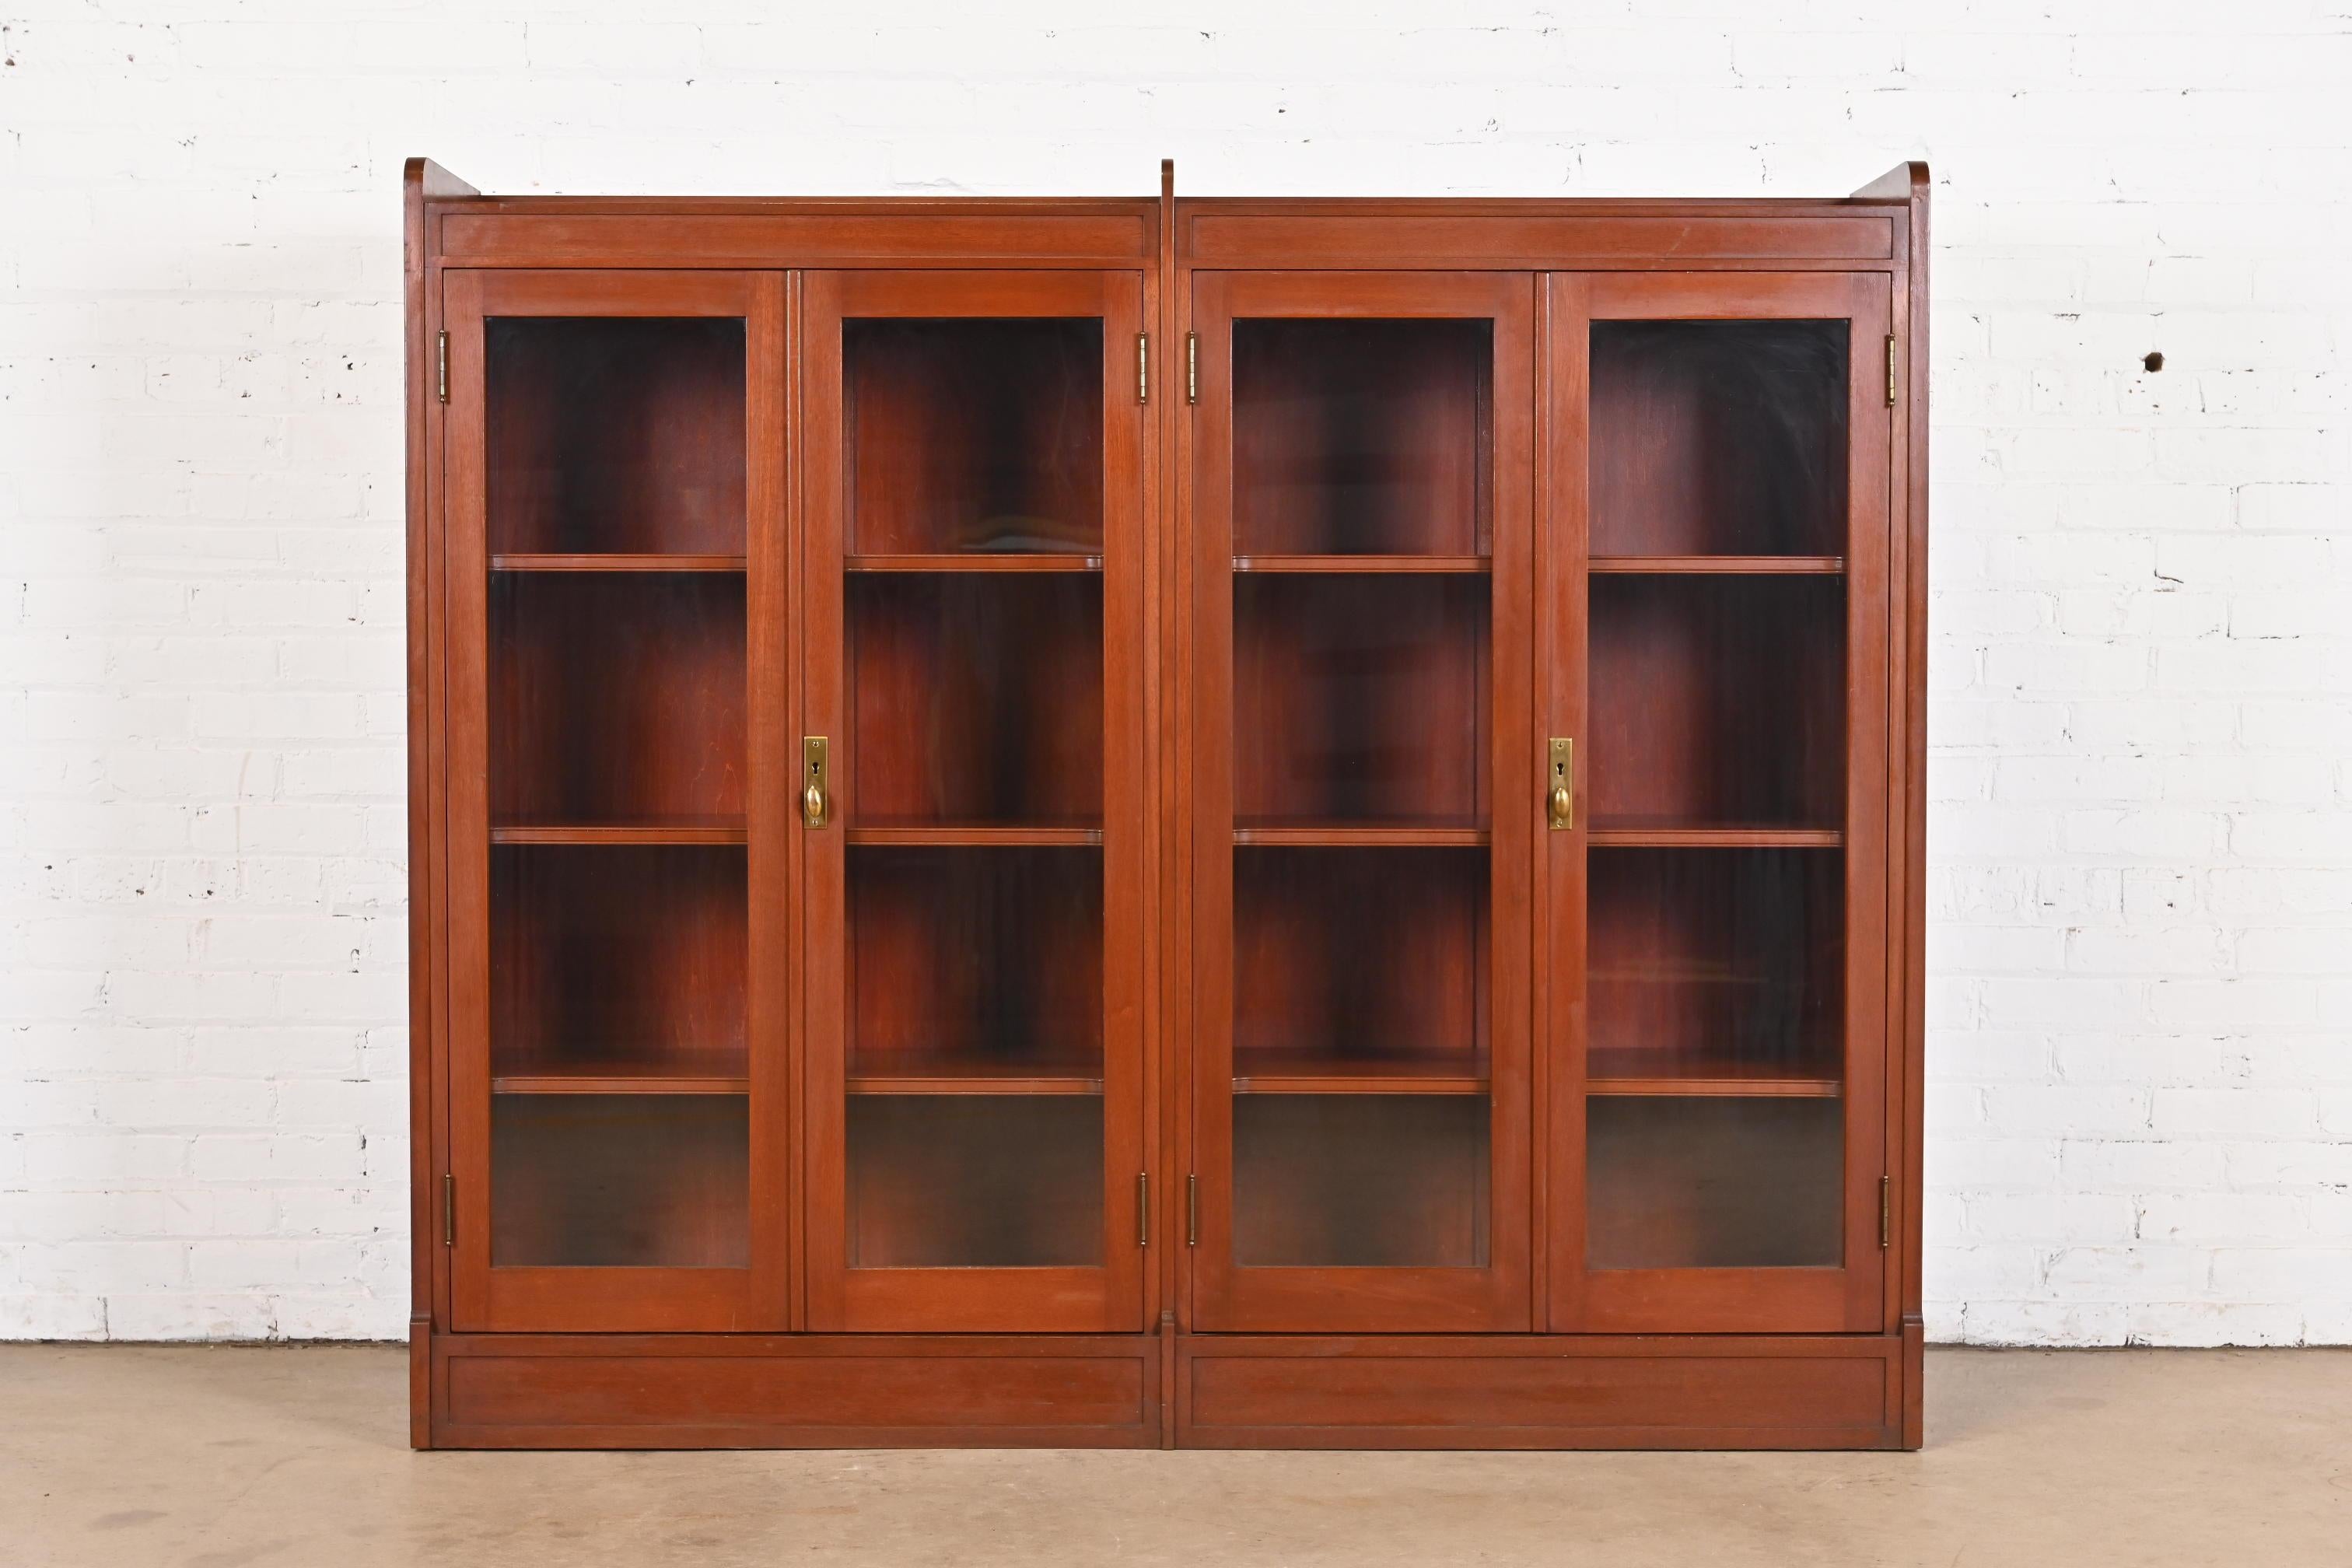 A gorgeous antique Arts & Crafts four-door double bookcase

In the manner of Stickley

USA, Circa 1920s

Solid mahogany, with glass front doors, and original brass hardware.

Measures: 66